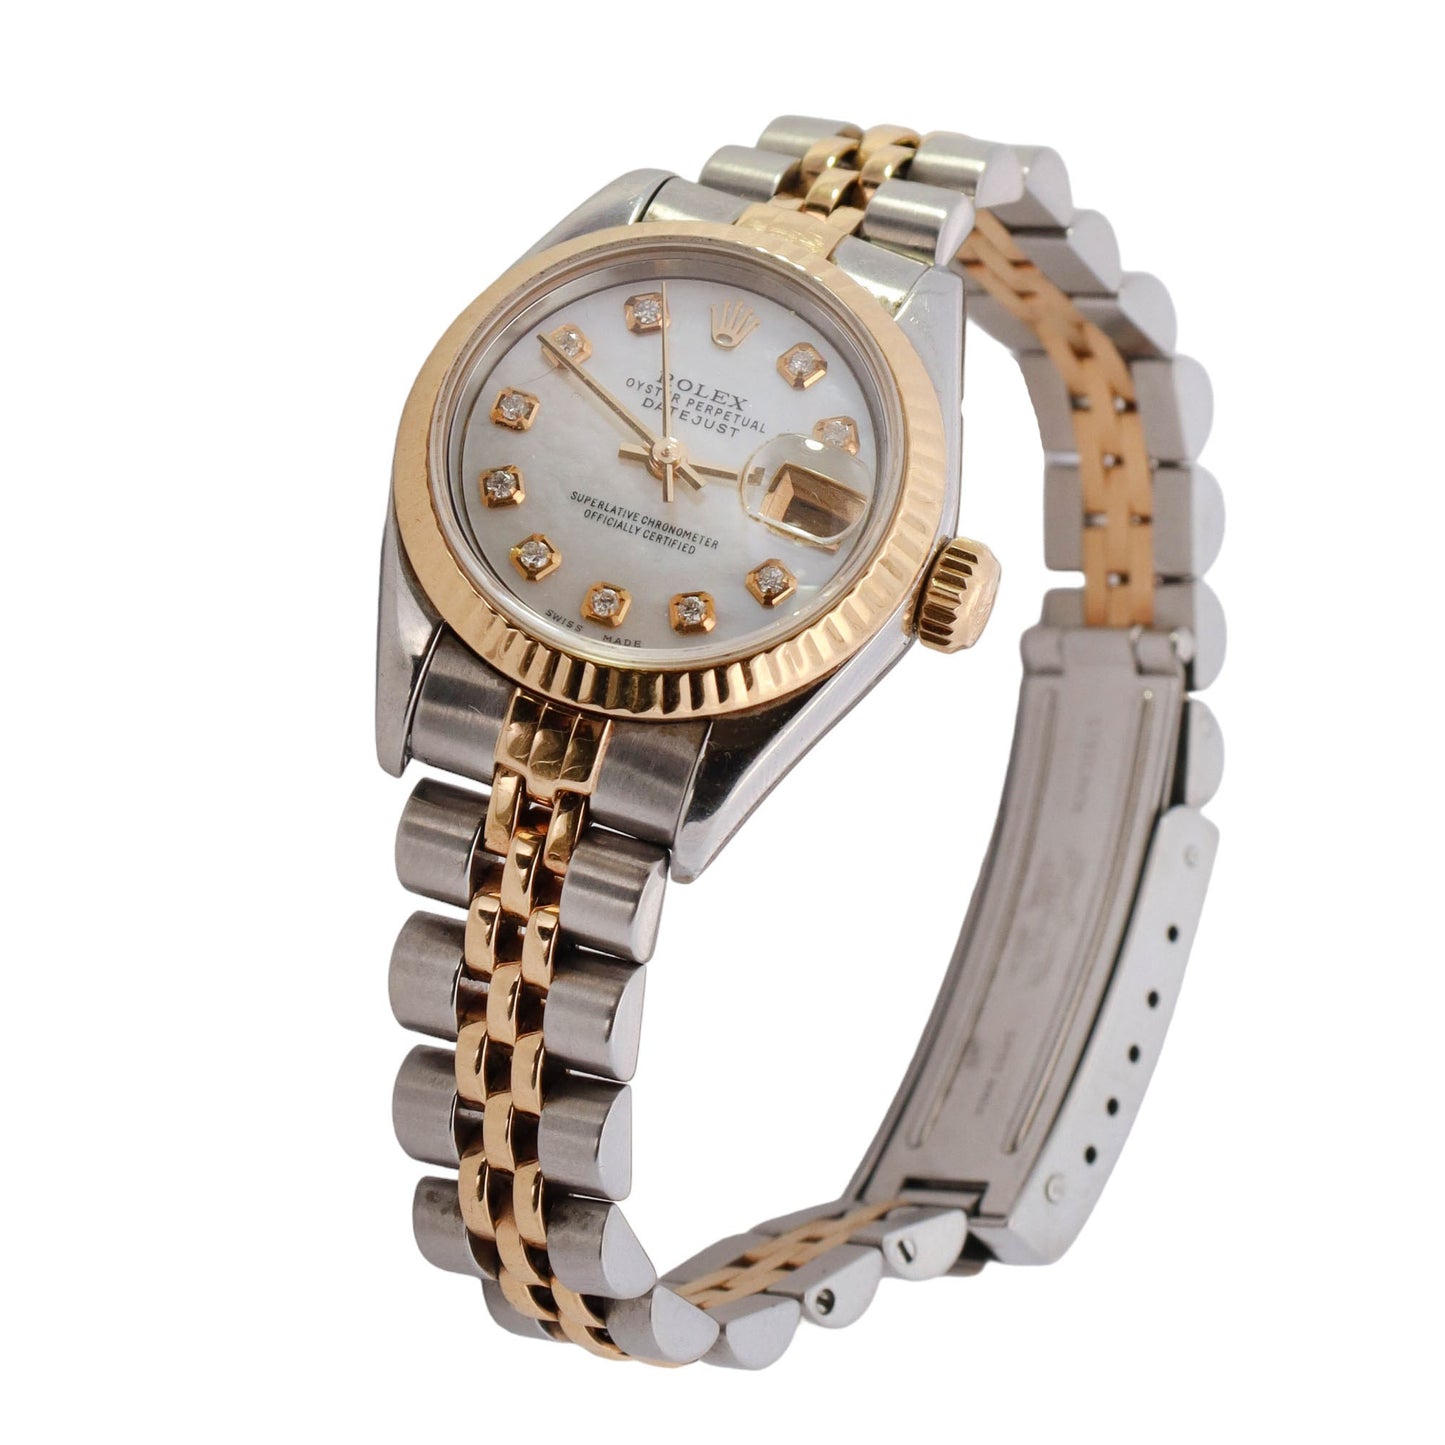 Rolex Datejust Yellow Gold & Stainless Steel 26mm MOP diamond Dial Watch Reference #: 79173 - Happy Jewelers Fine Jewelry Lifetime Warranty